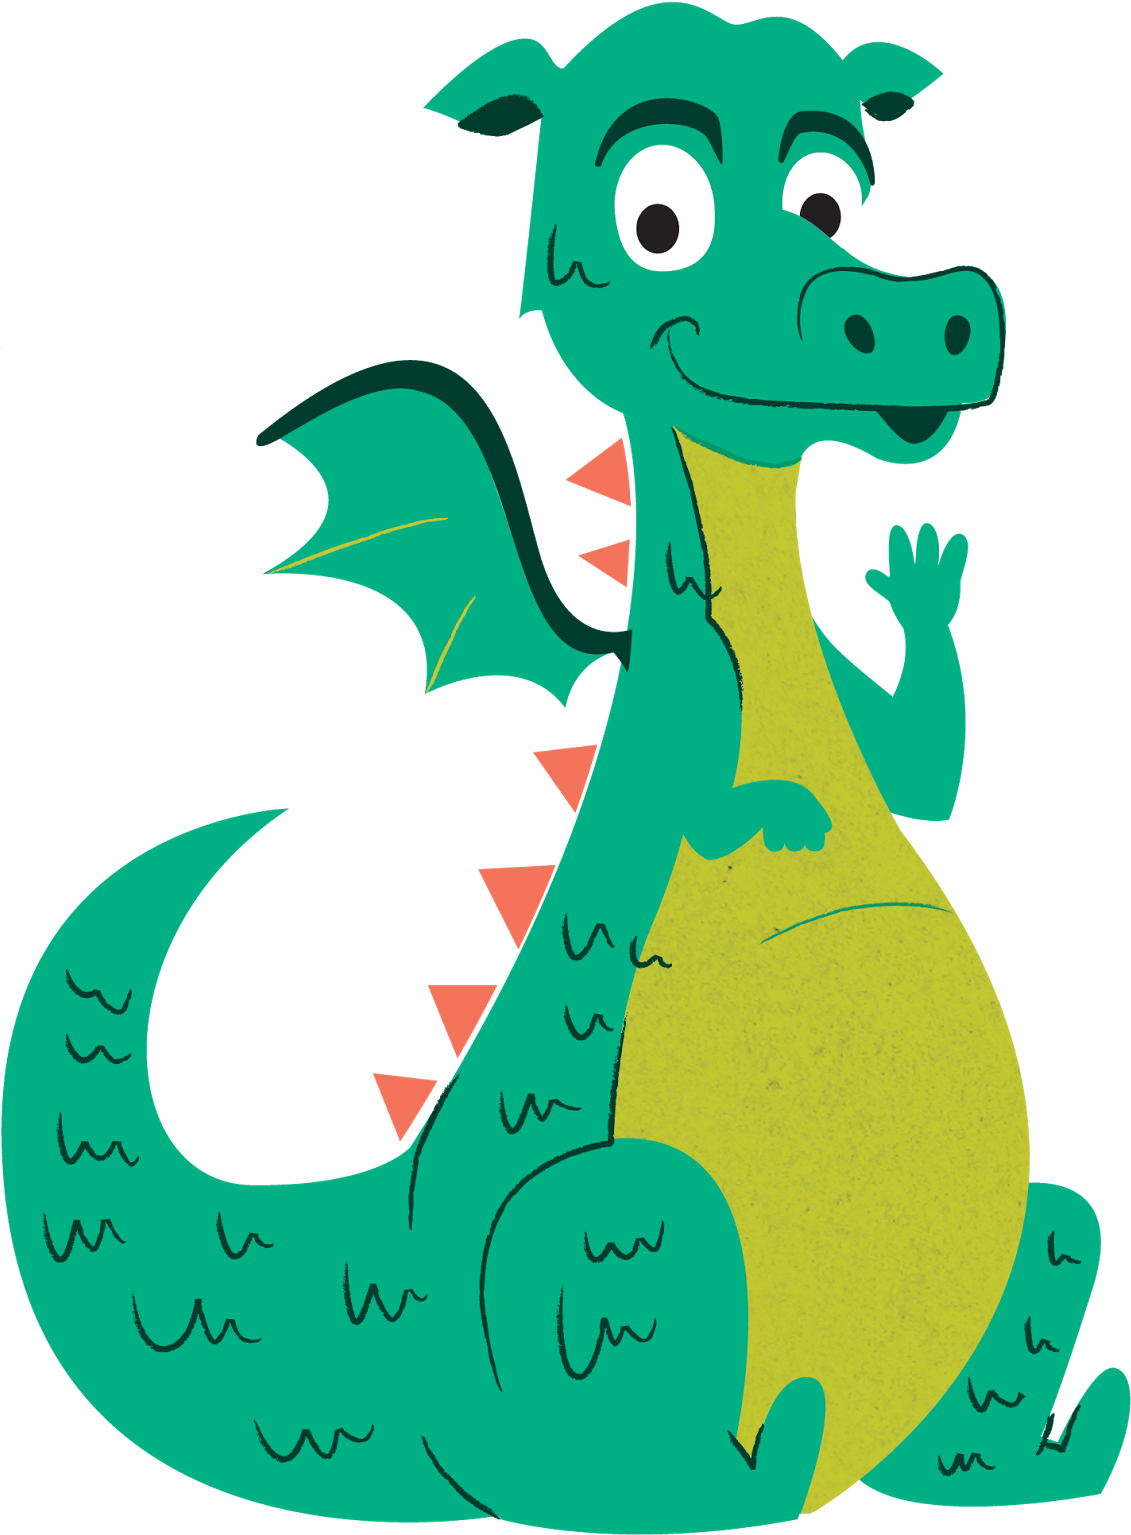 Dragon Images For Kids - Dragon Pictures For Kids (1237x1600)